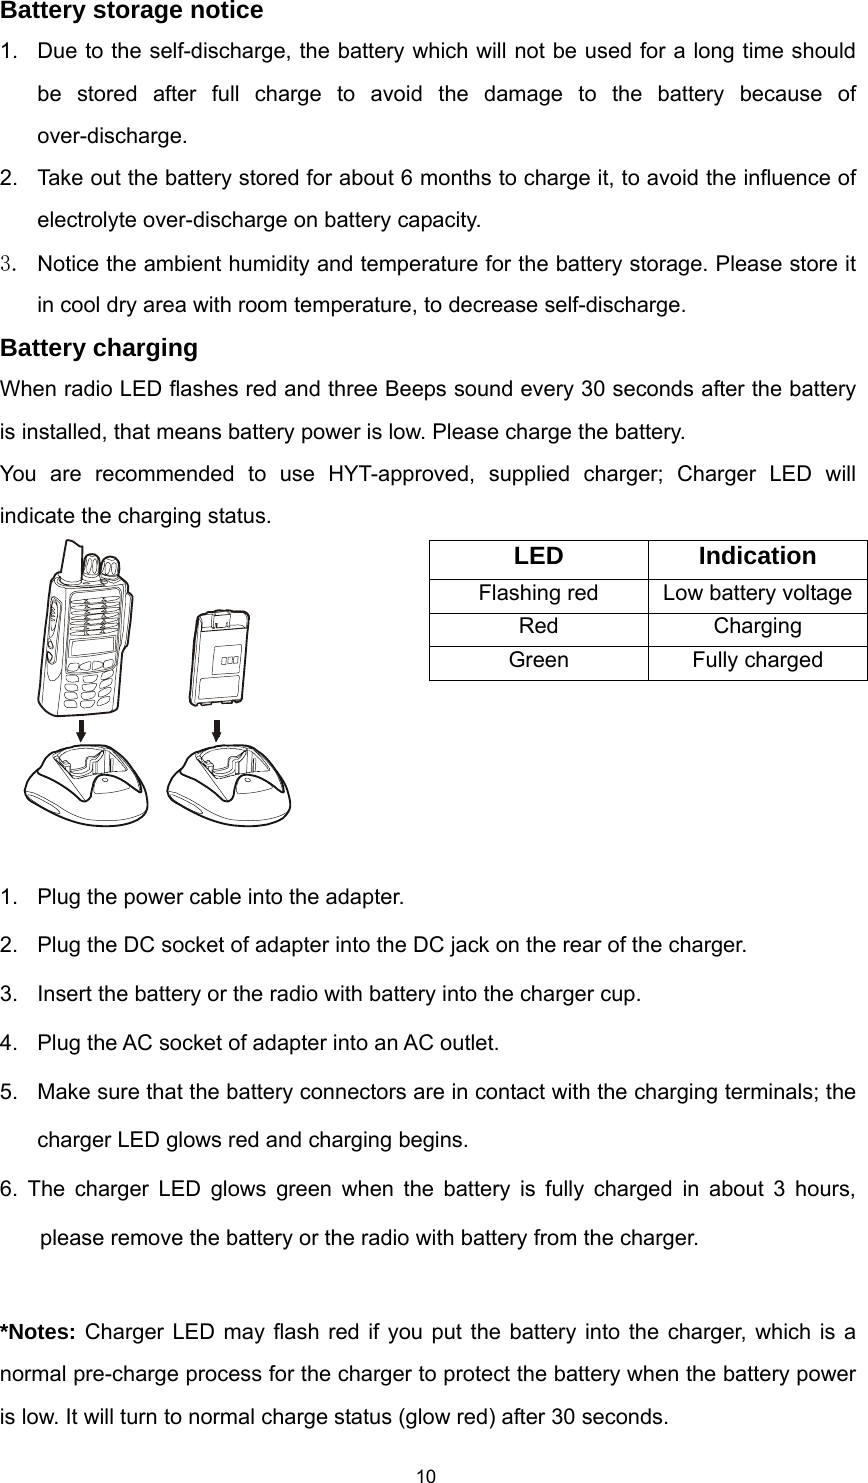  10Battery storage notice 1.  Due to the self-discharge, the battery which will not be used for a long time should be stored after full charge to avoid the damage to the battery because of over-discharge. 2.  Take out the battery stored for about 6 months to charge it, to avoid the influence of electrolyte over-discharge on battery capacity.   3. Notice the ambient humidity and temperature for the battery storage. Please store it in cool dry area with room temperature, to decrease self-discharge. Battery charging When radio LED flashes red and three Beeps sound every 30 seconds after the battery is installed, that means battery power is low. Please charge the battery. You are recommended to use HYT-approved, supplied charger; Charger  LED will indicate the charging status.    1.  Plug the power cable into the adapter.   2.  Plug the DC socket of adapter into the DC jack on the rear of the charger.   3.  Insert the battery or the radio with battery into the charger cup.   4.  Plug the AC socket of adapter into an AC outlet.   5.  Make sure that the battery connectors are in contact with the charging terminals; the charger LED glows red and charging begins. 6. The charger LED glows green when the battery is fully charged in about 3 hours, please remove the battery or the radio with battery from the charger.  *Notes: Charger LED may flash red if you put the battery into the charger, which is a normal pre-charge process for the charger to protect the battery when the battery power is low. It will turn to normal charge status (glow red) after 30 seconds.   LED Indication Flashing red  Low battery voltageRed Charging Green Fully charged 